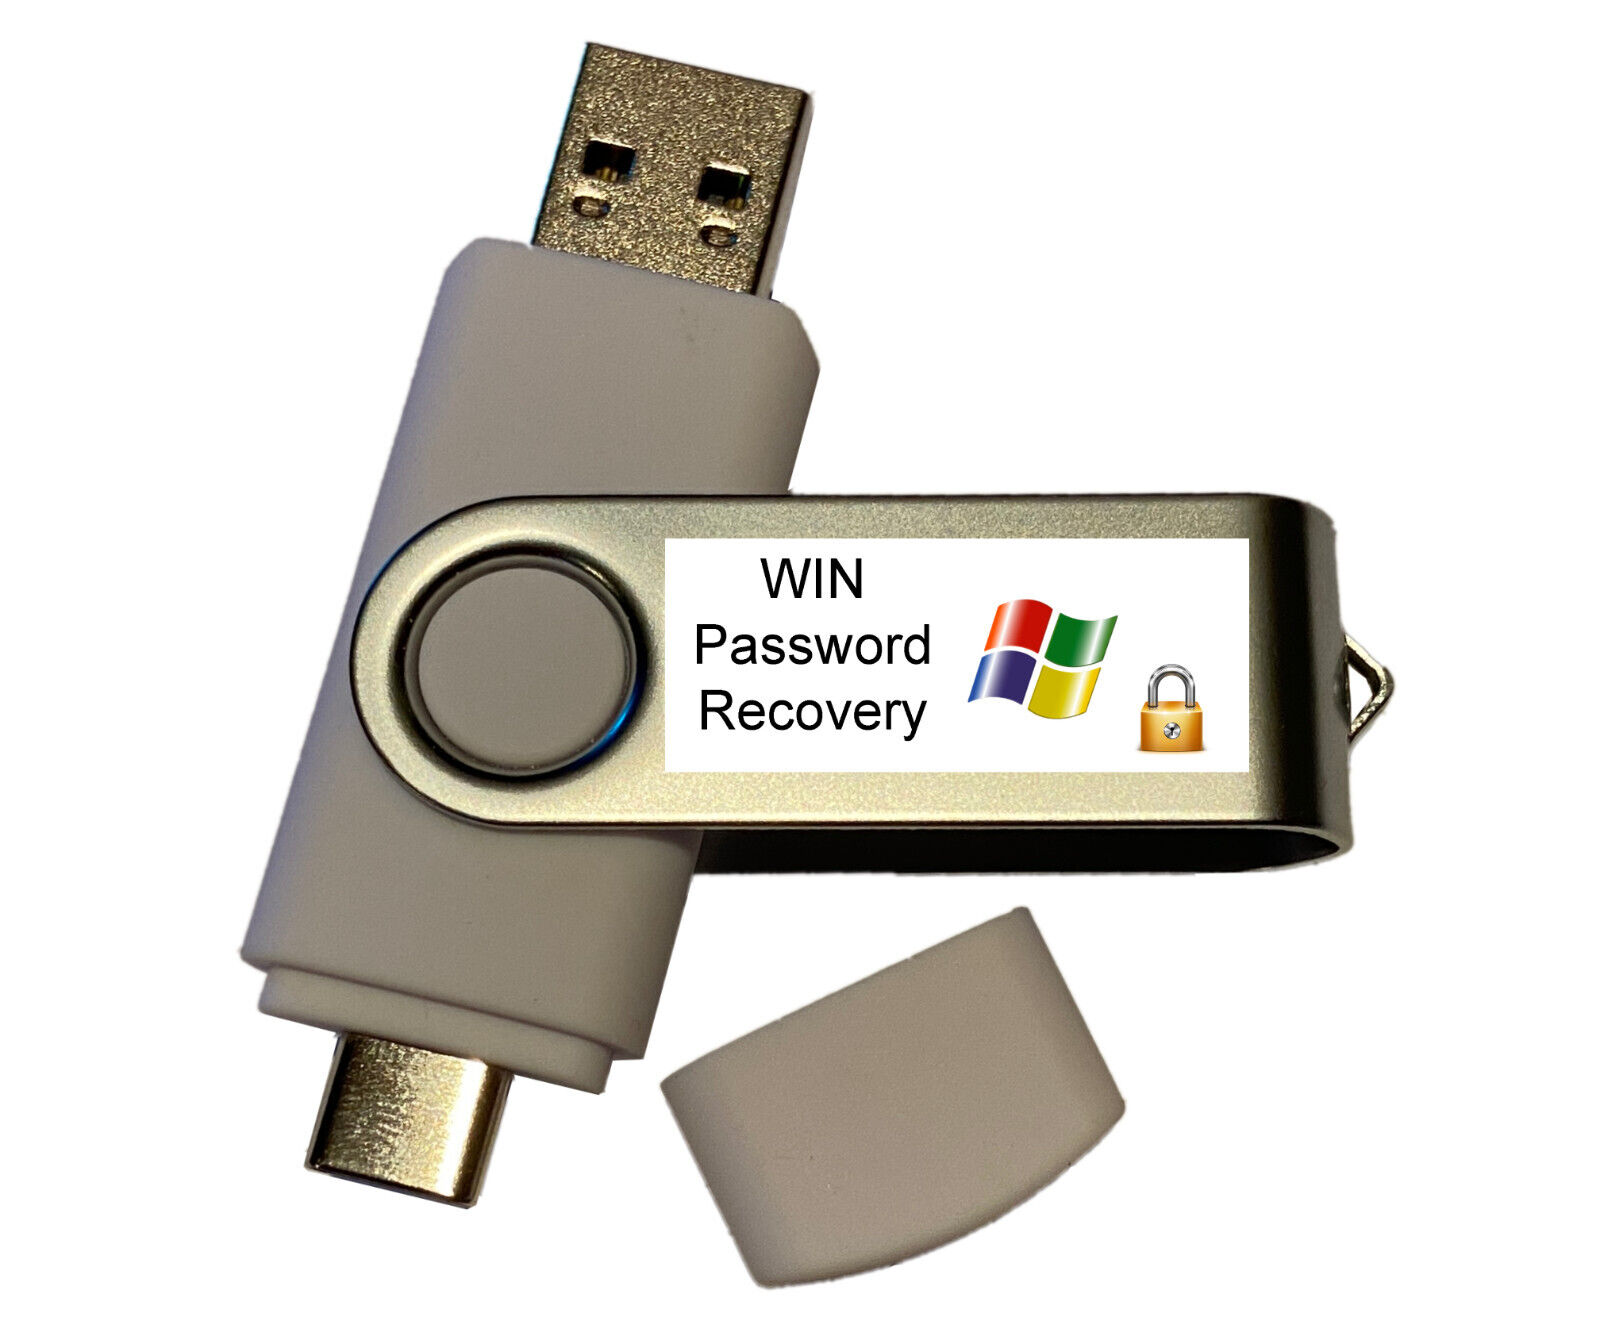 Computer IT Windows and Linux Password Hacker Cracker Removal - LIVE USB-C Tool